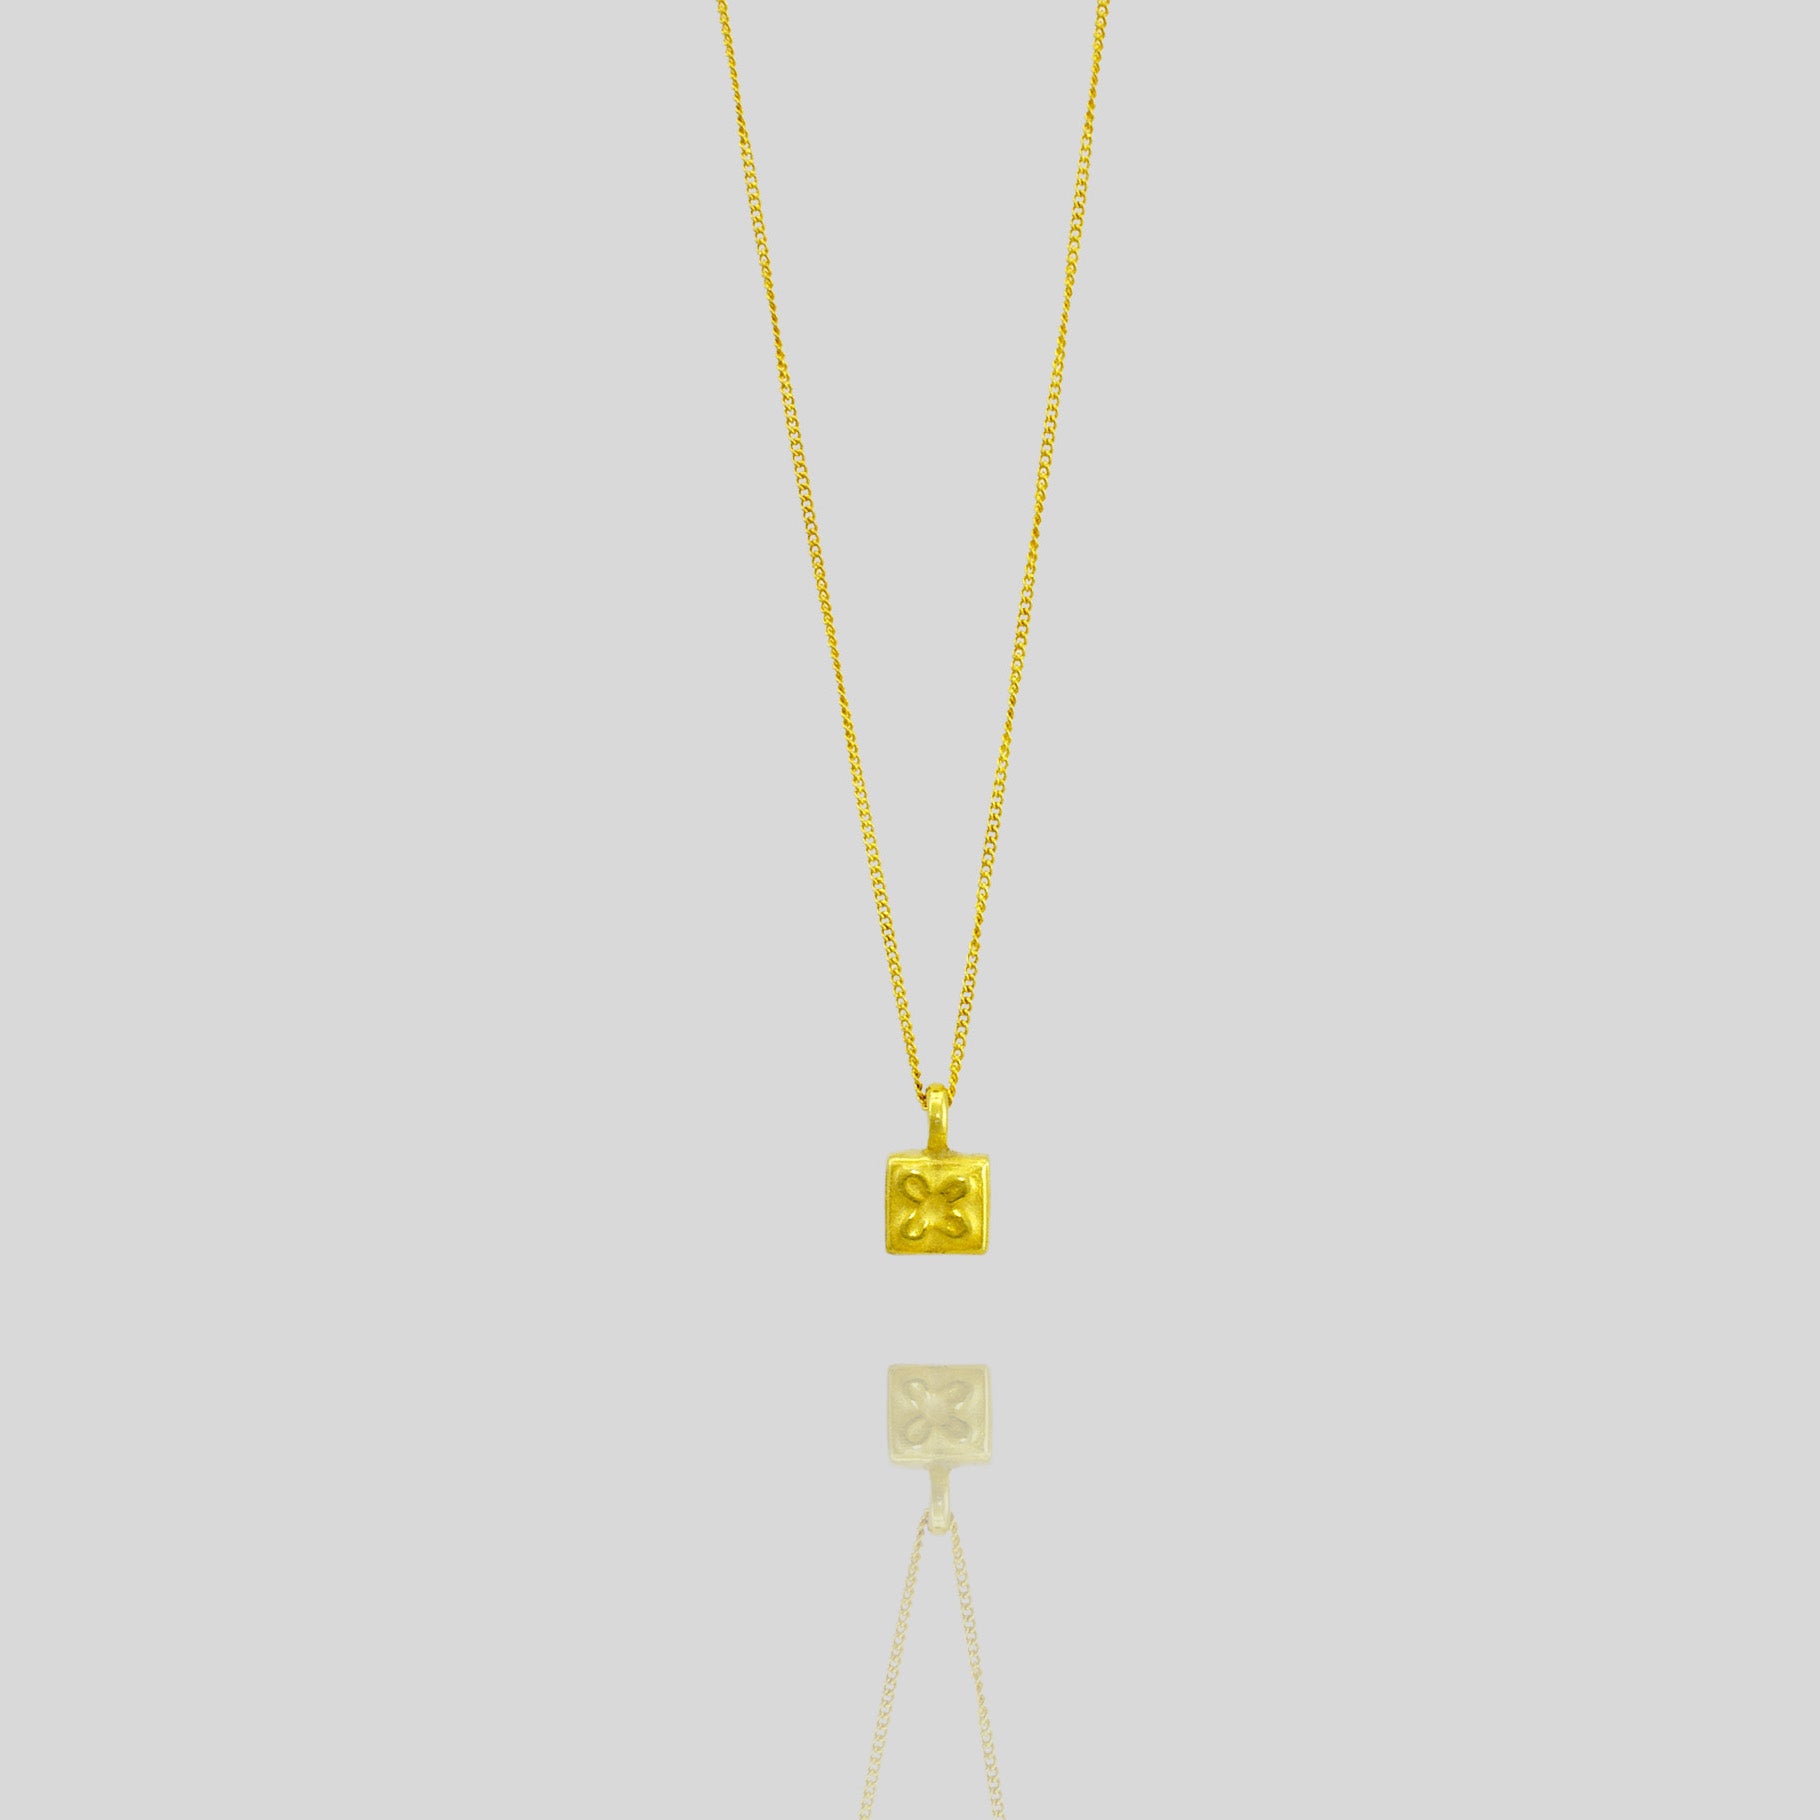 Handcrafted 18k Gold Pendant with a delicate square shape and a small flower at the center, showcasing elegance and careful craftsmanship.